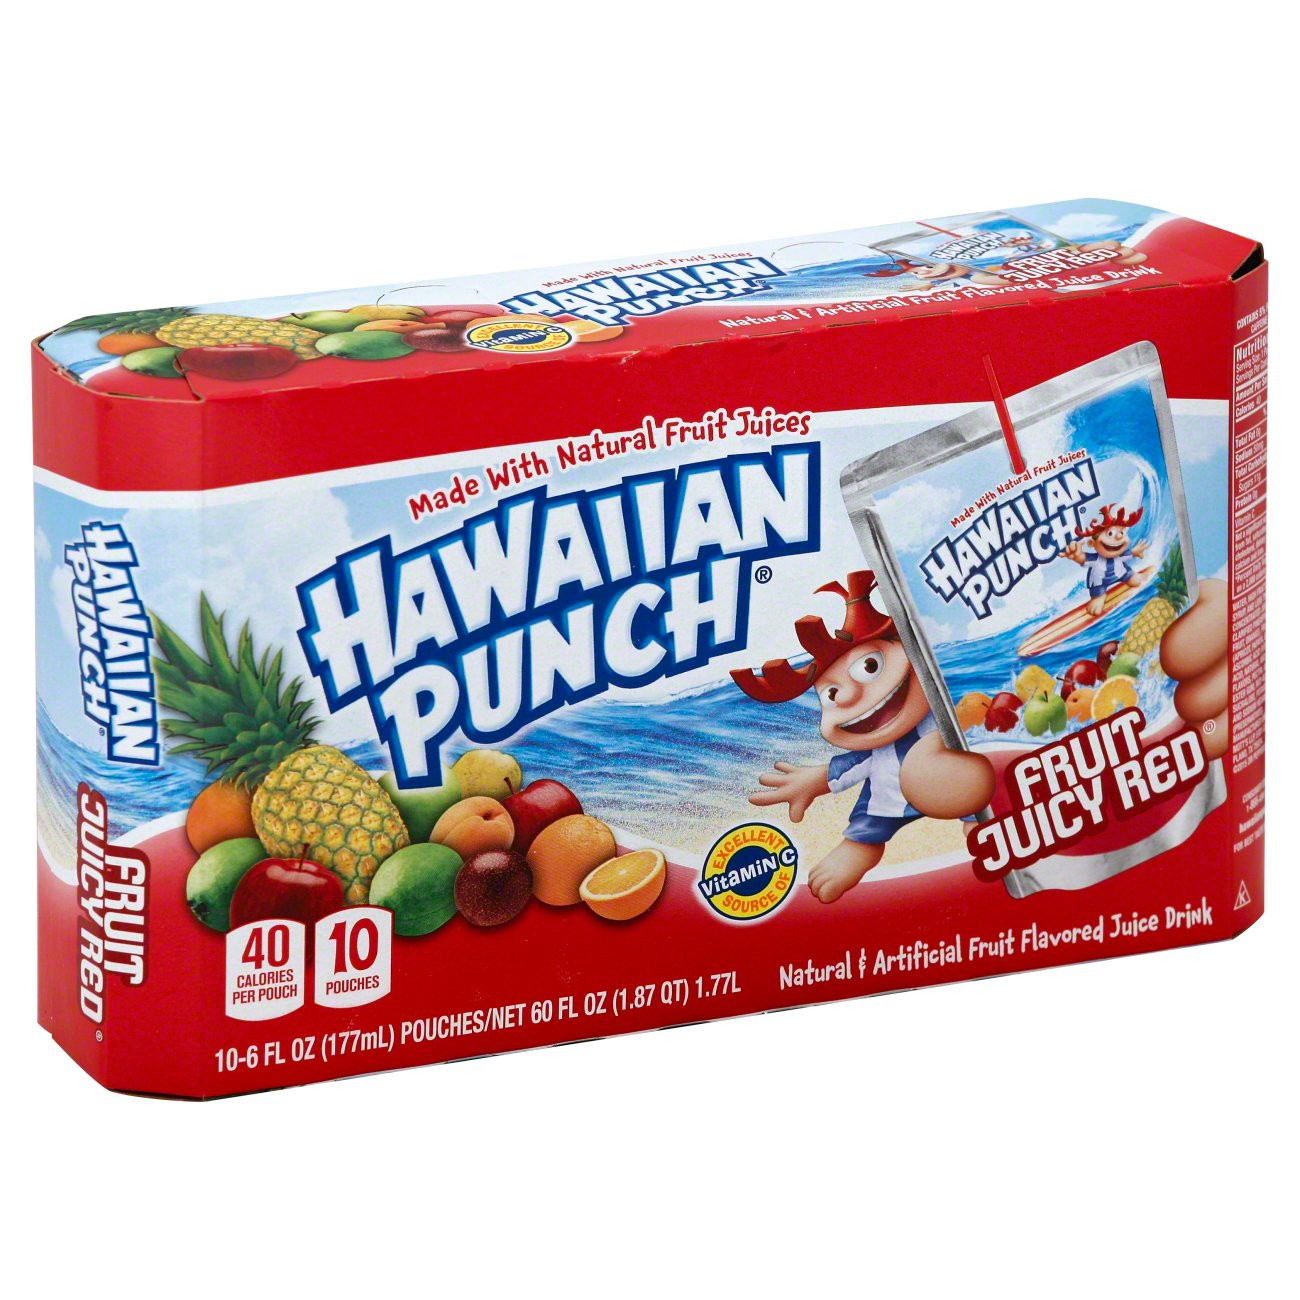 Hawaiian Punch Fruit Juicy Red Drink 6 Oz Pouches Shop Juice At H E B 0912